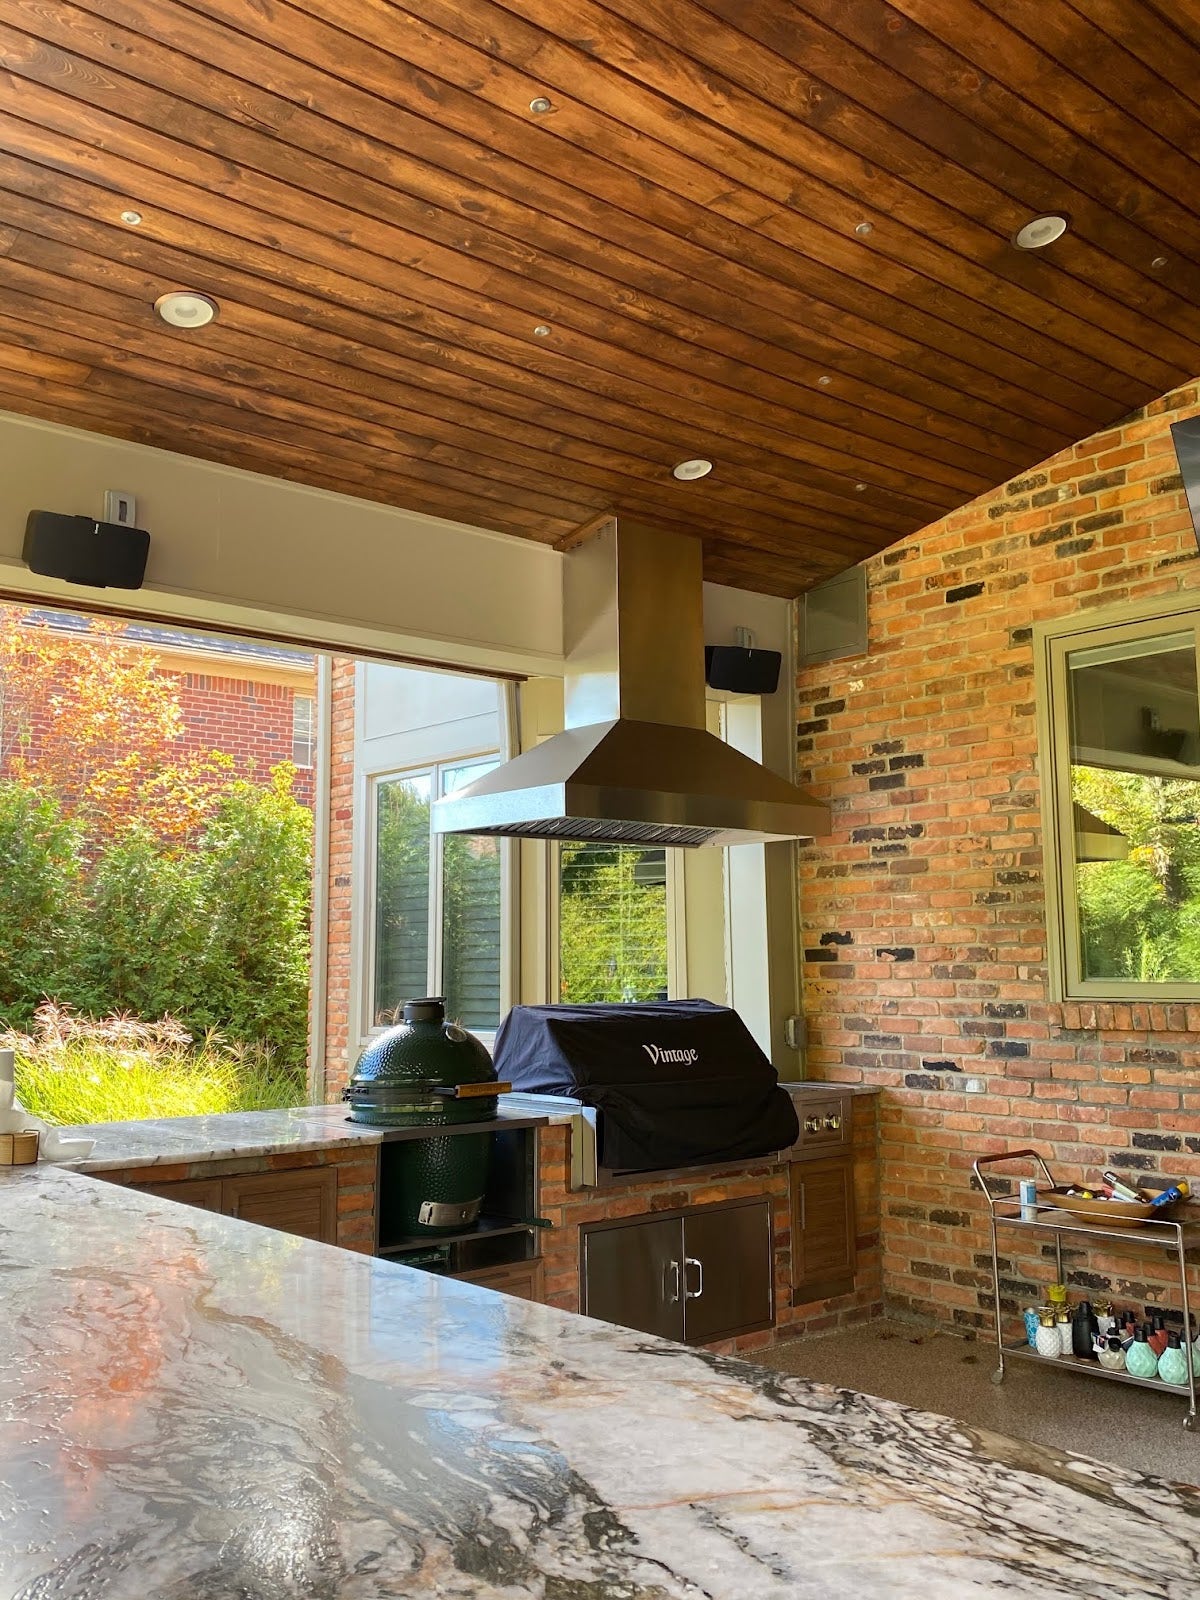 Elegant outdoor cooking space with a Proline range hood, brick accents, and wood plank ceiling - prolinerangehoods.com